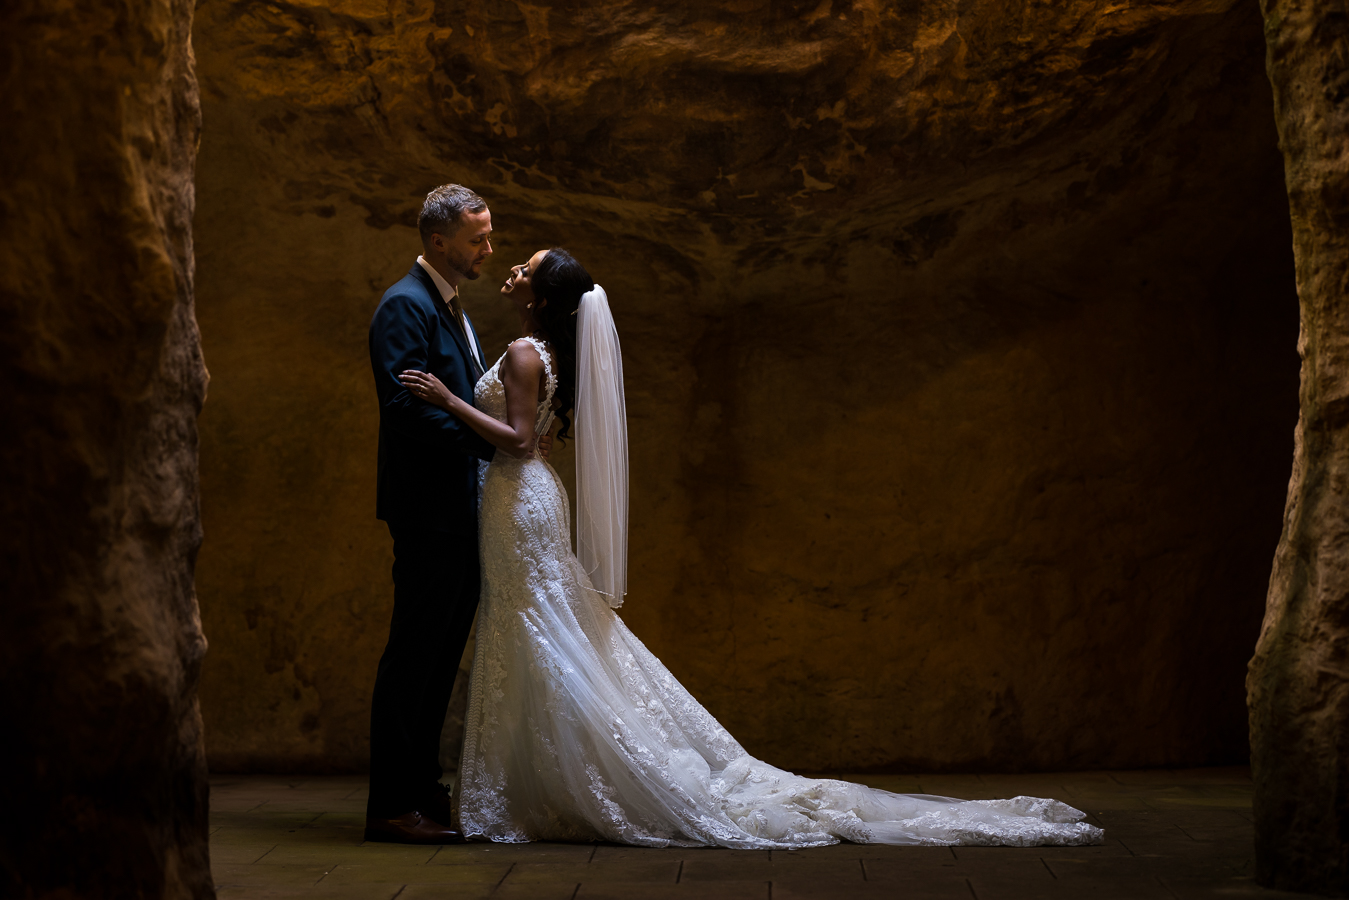 dc wedding photographer, Lisa Rhinehart, captures this image of the bride and groom hugging one another inside of a cave at st francis hall in Washington, dc during their Multicultural DC Wedding ceremony 